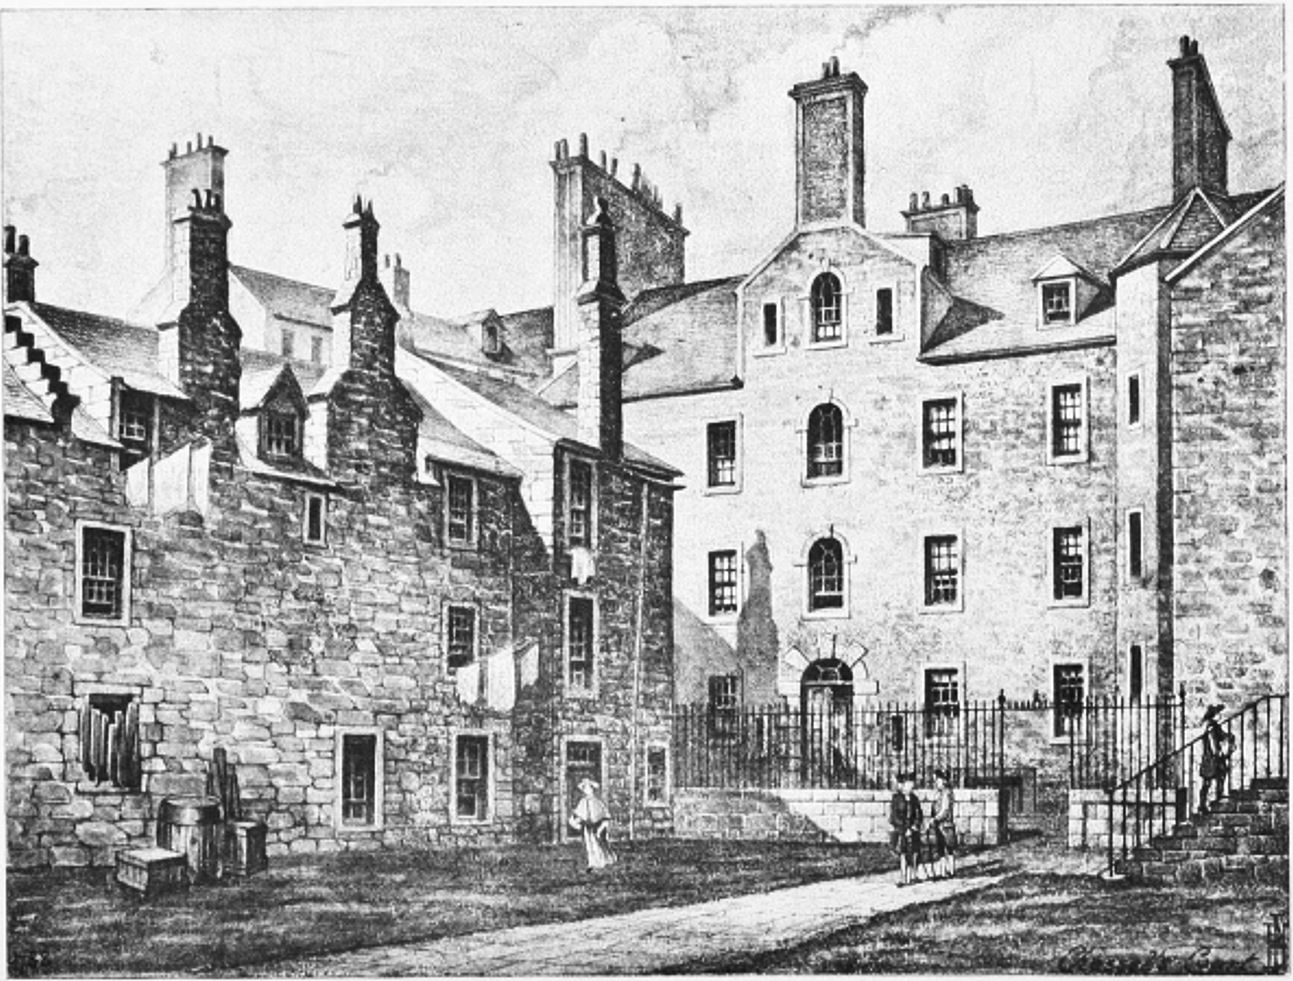 A black and white sketch of Chessels Court in Edinburgh. You can see a backyard behind some houses with some people inside the yard.